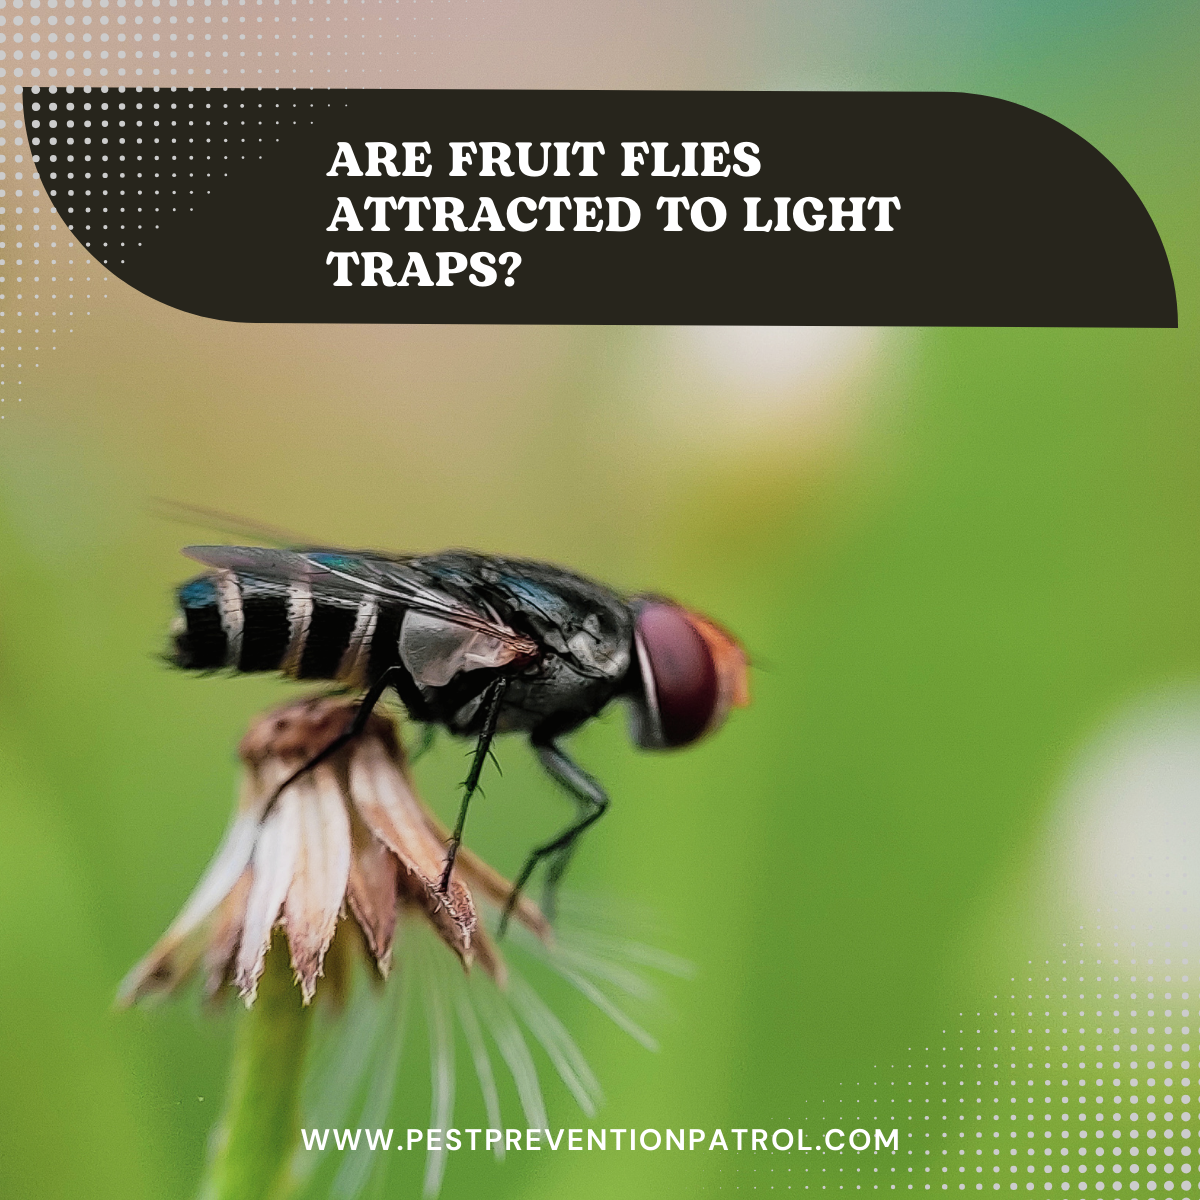 Are Fruit Flies Attracted to Light Traps